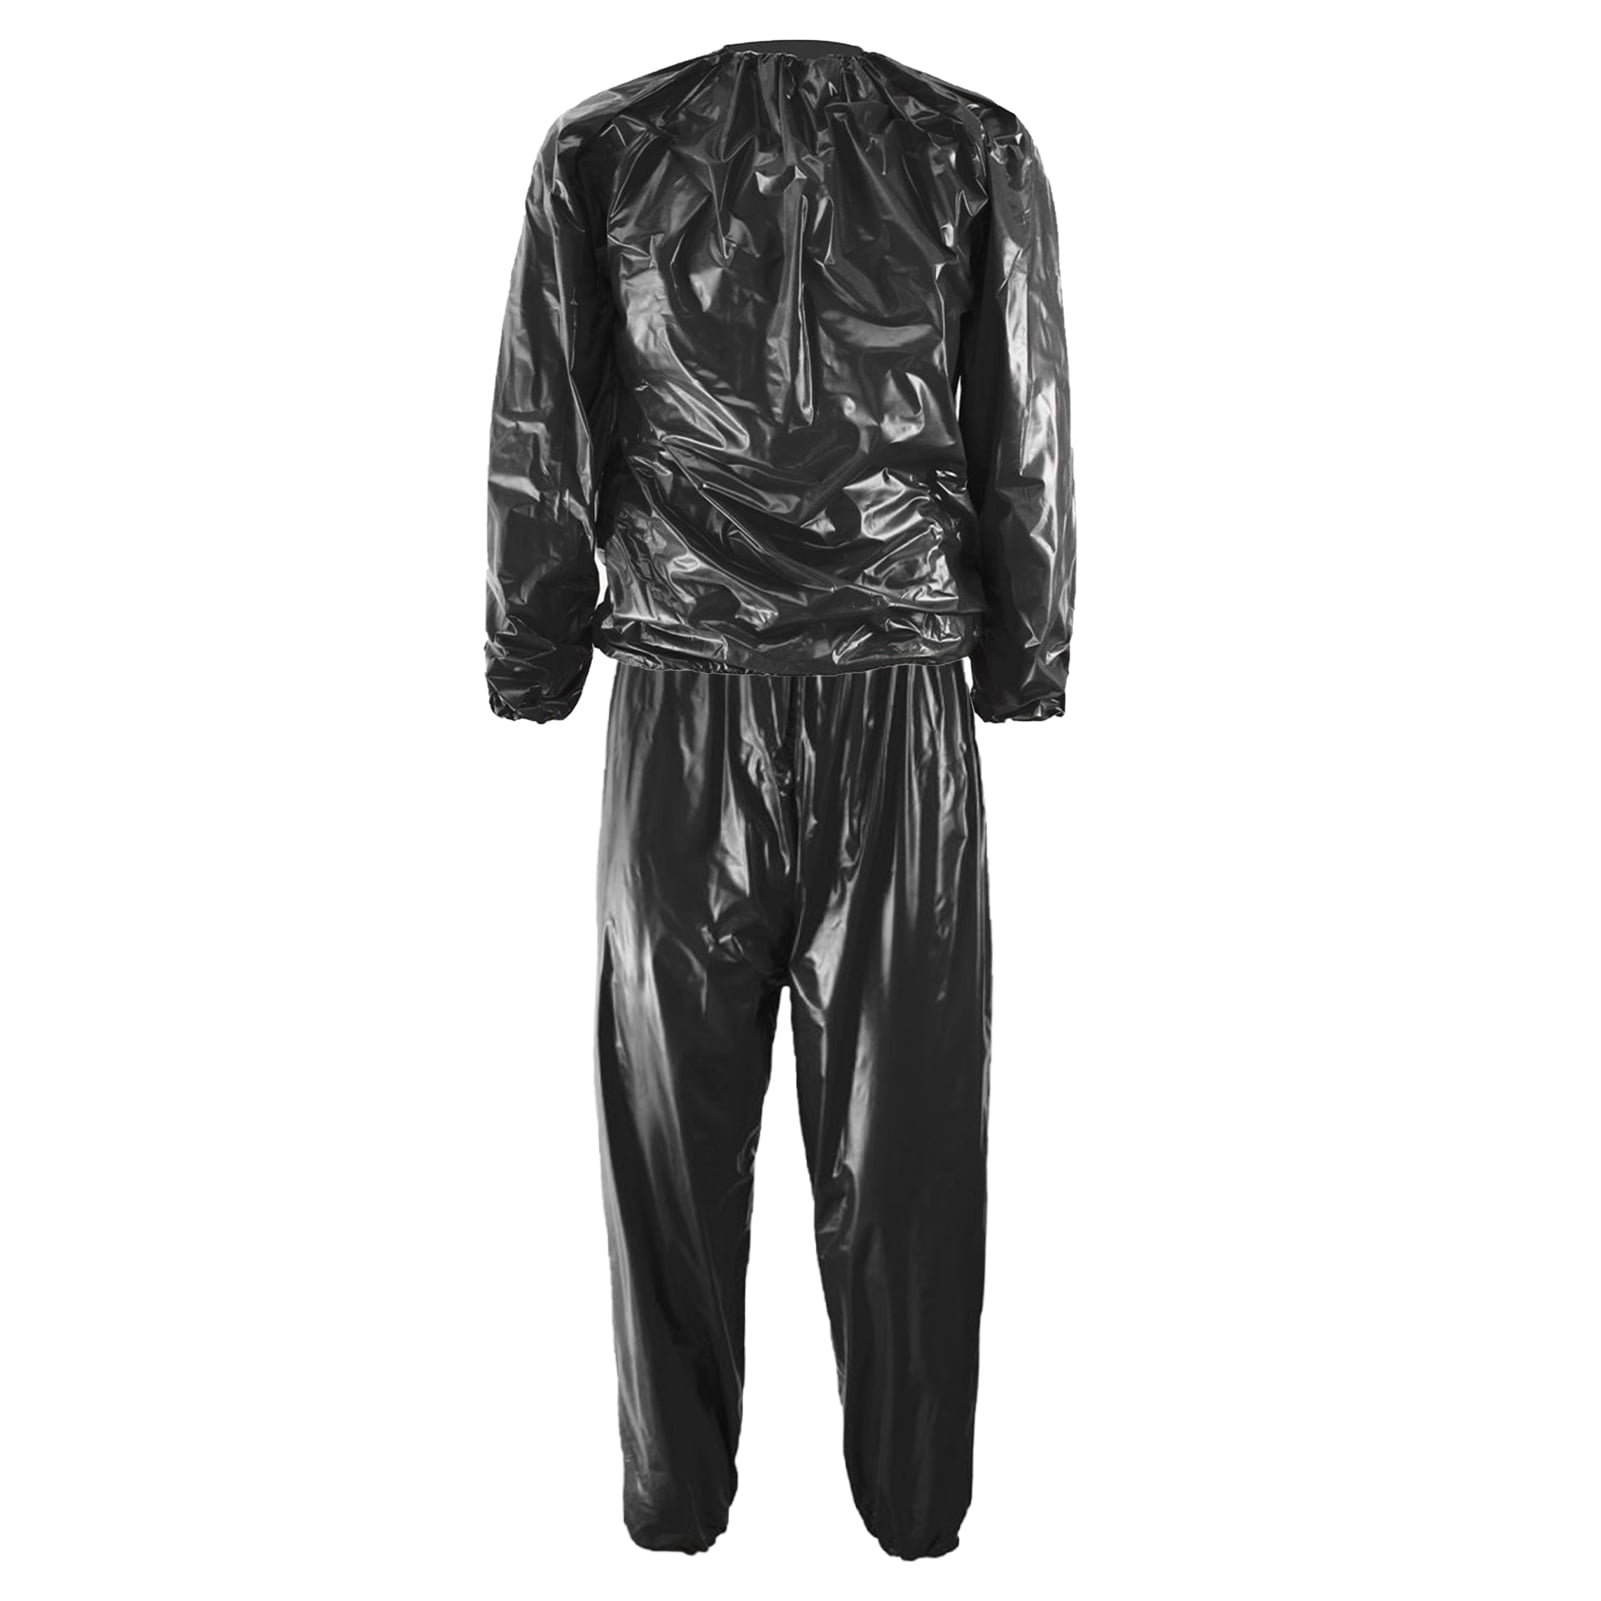 Details about   Sauna Suit Sweat Exercise Gym Fitness Weight Loss Loss Suit Top Pants Clothes Se 